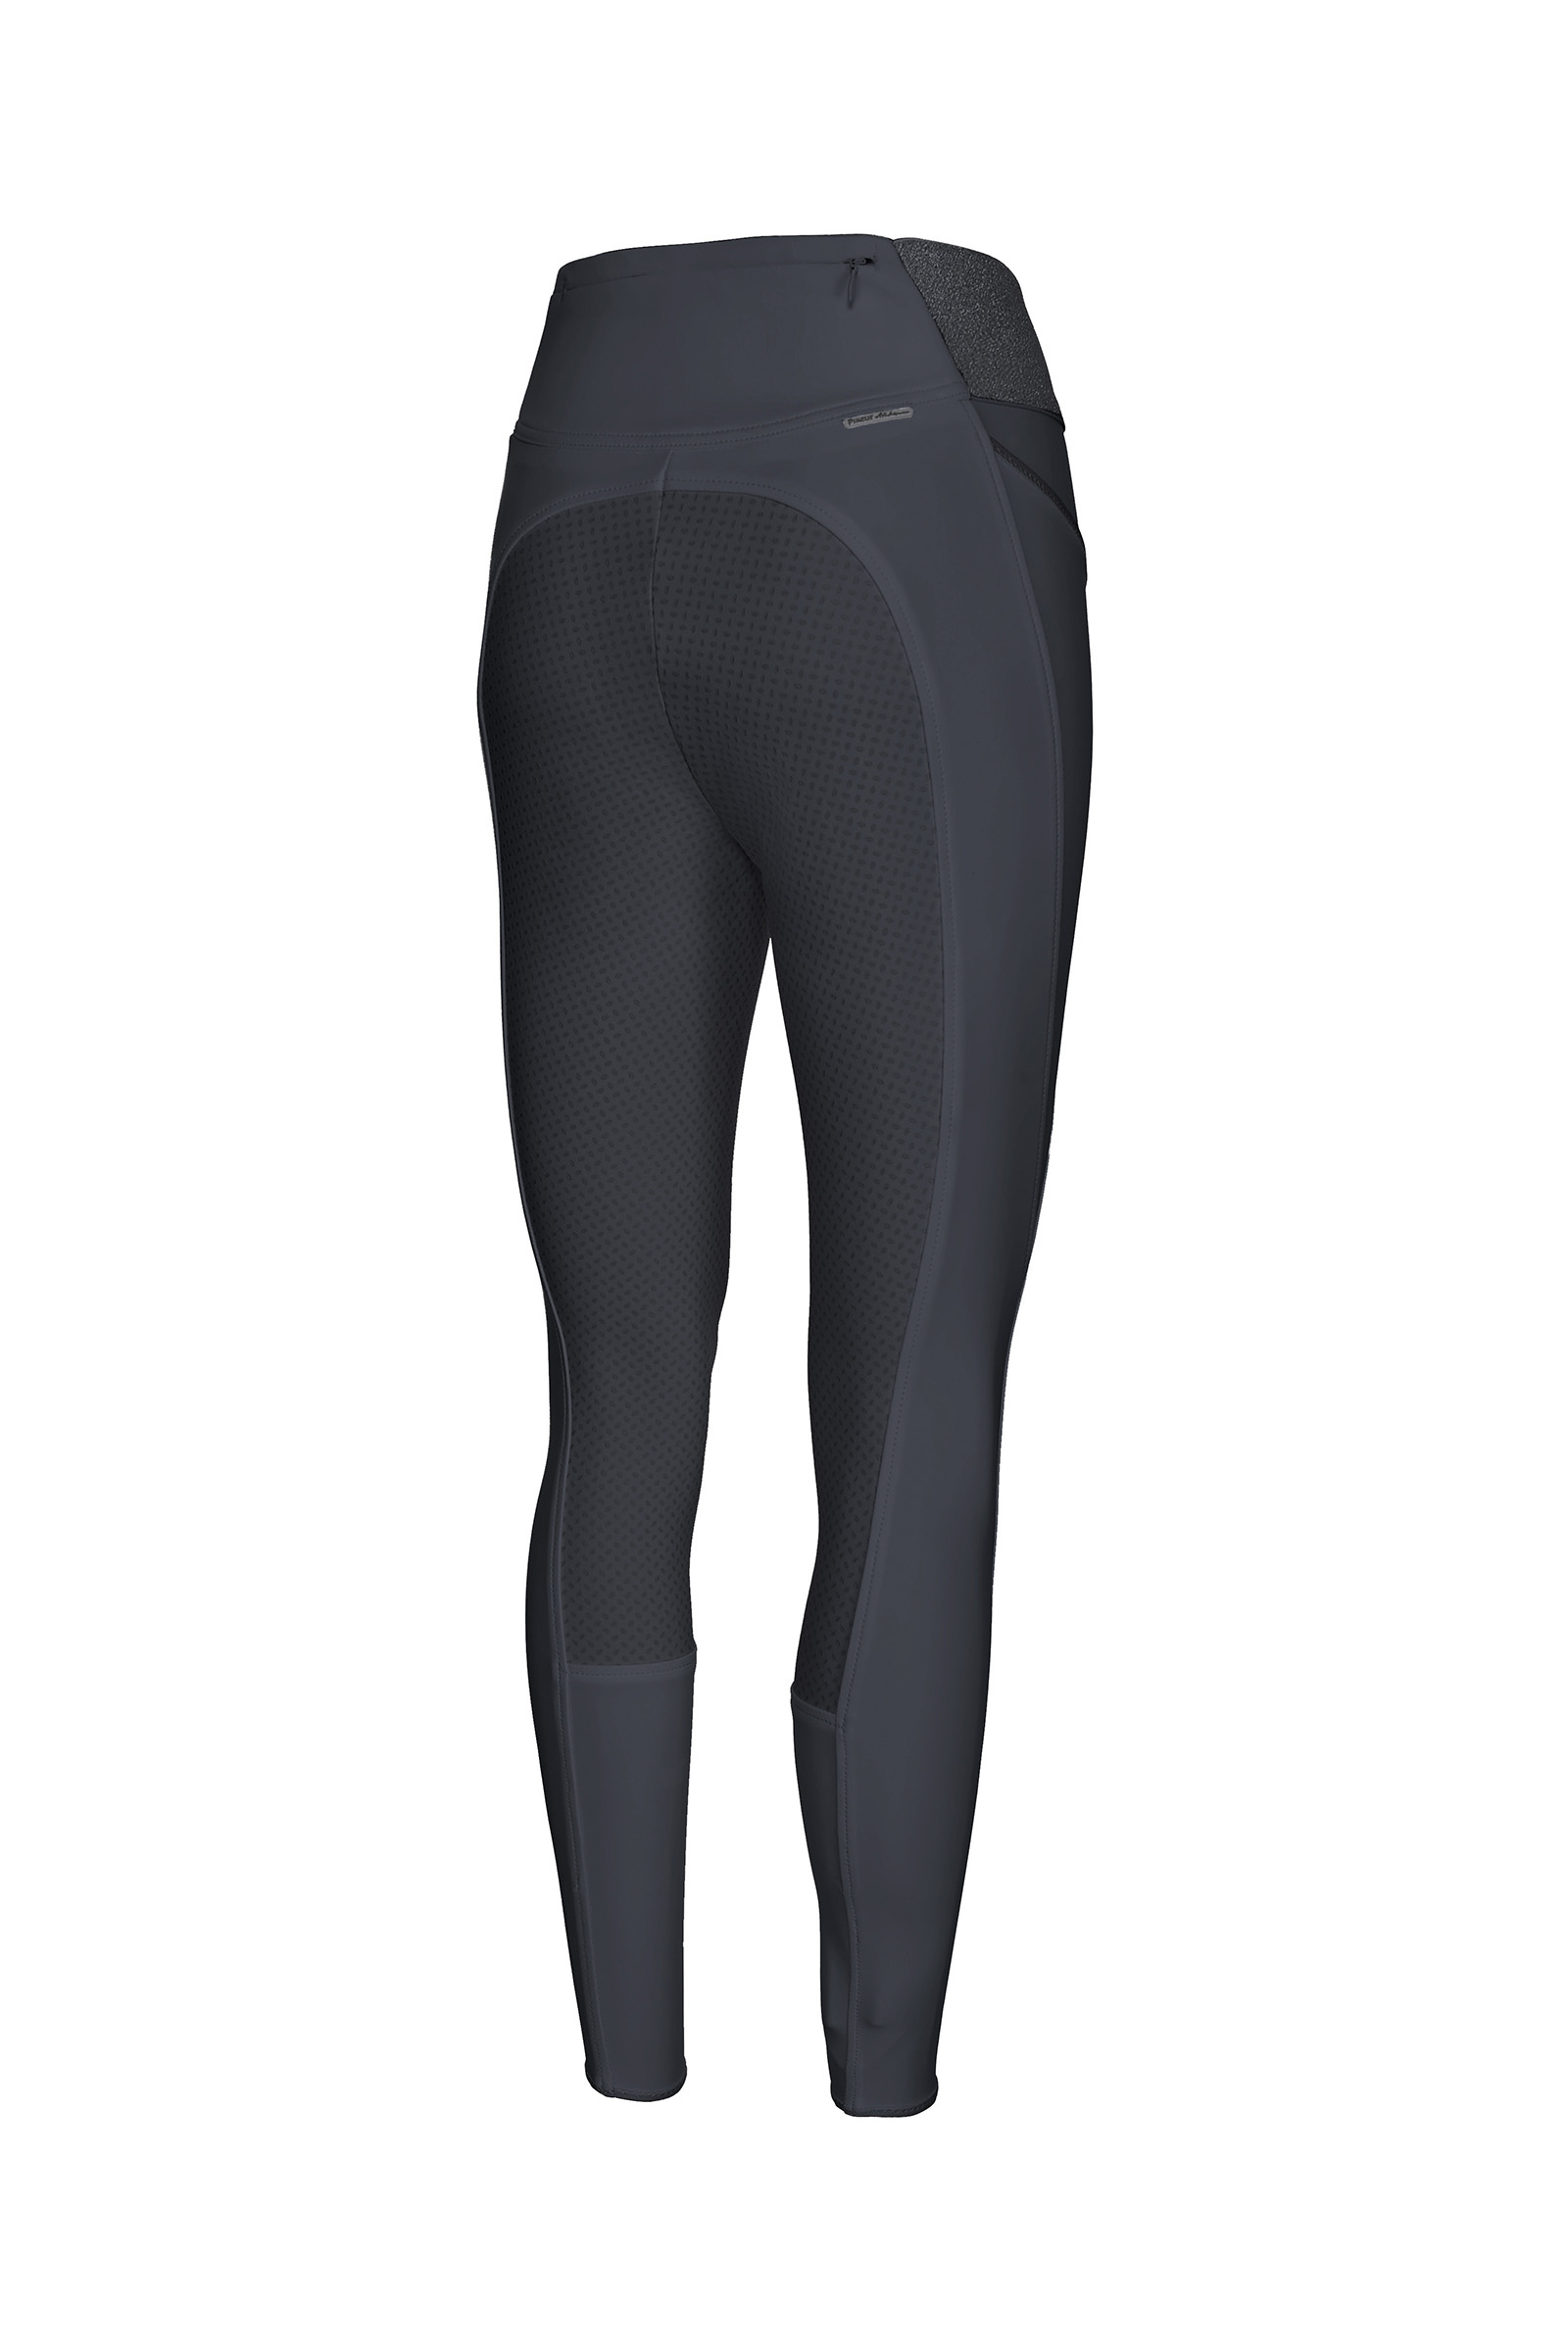 Ariat EOS Knee Grip Patch Riding Tights - Ladies Pull On Riding Tights